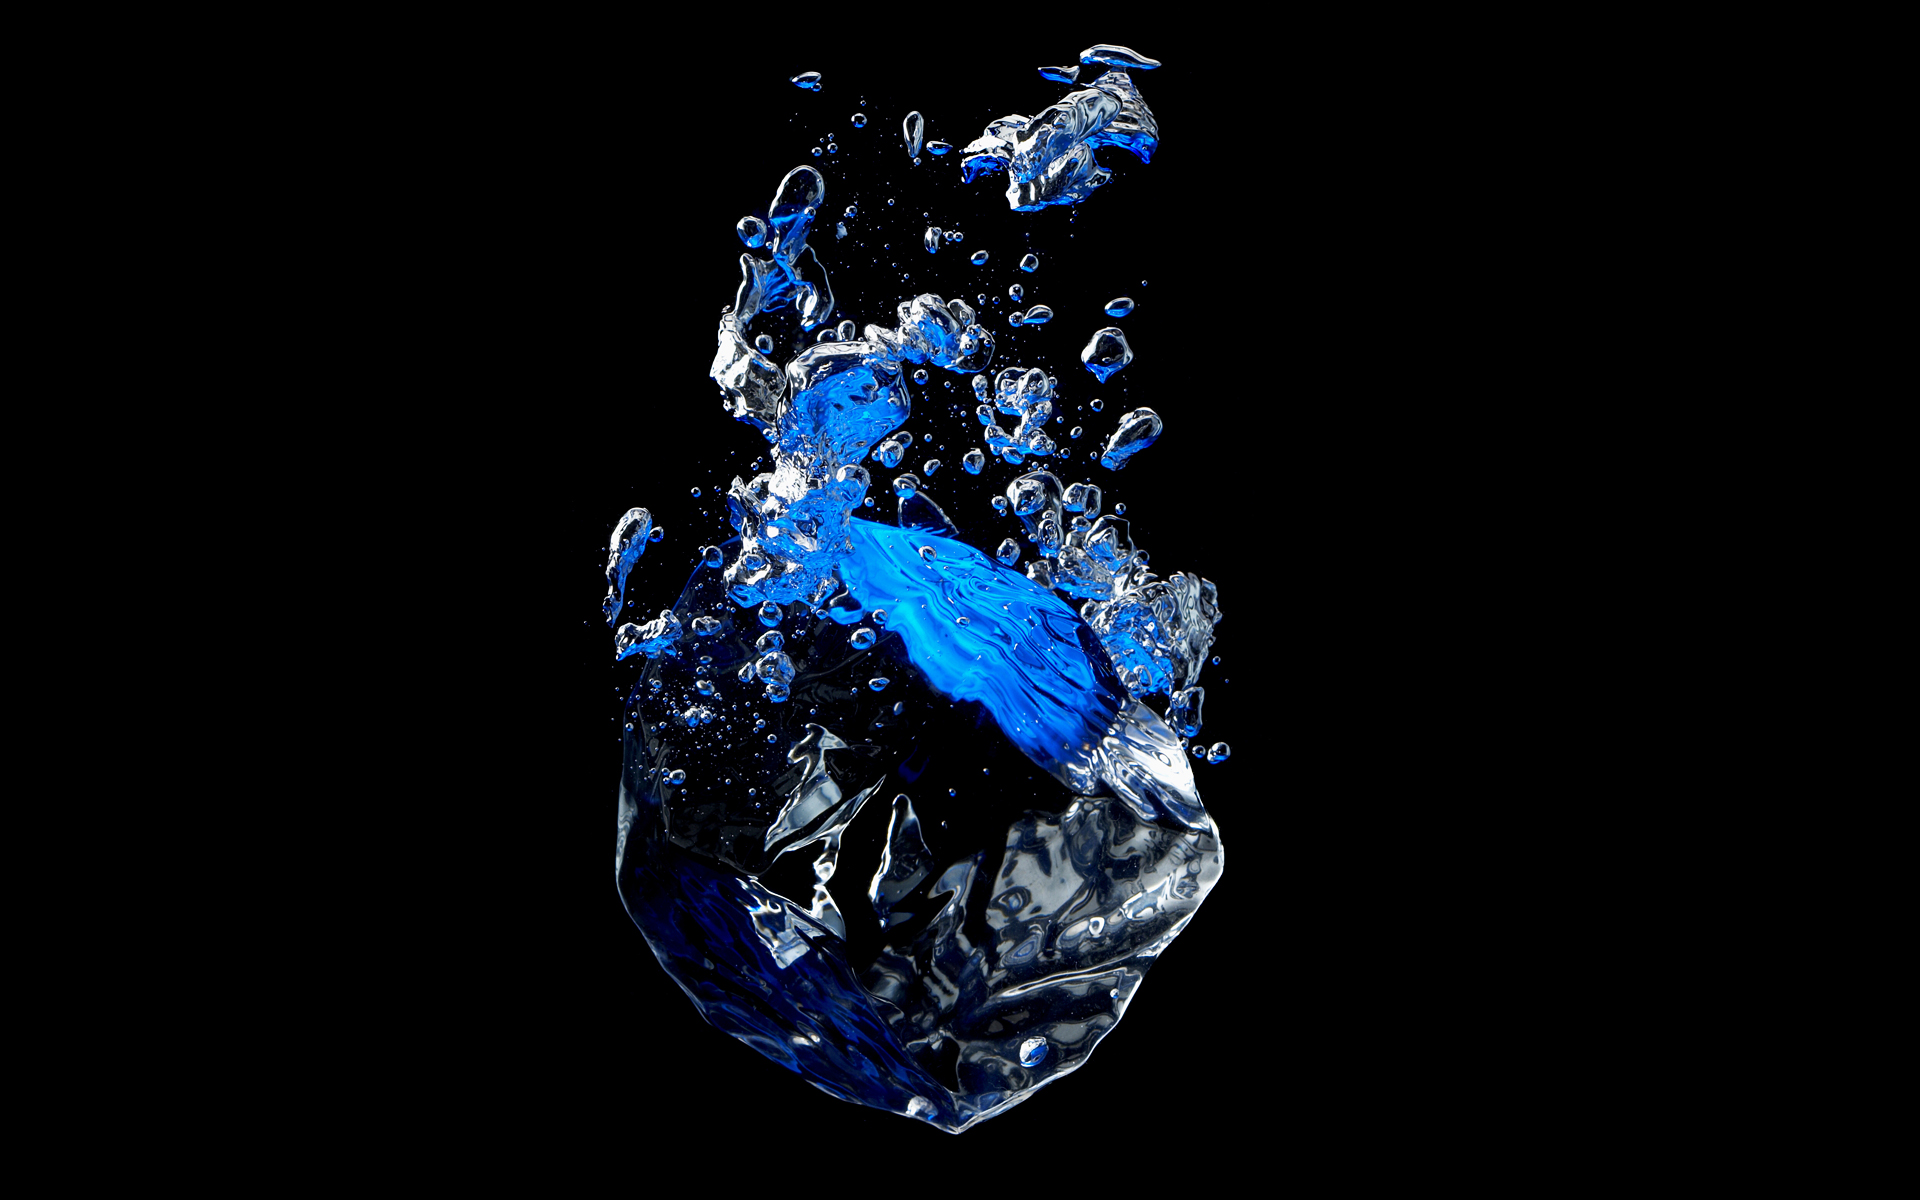 Ice Cube Falling Into Water Against A Black Background